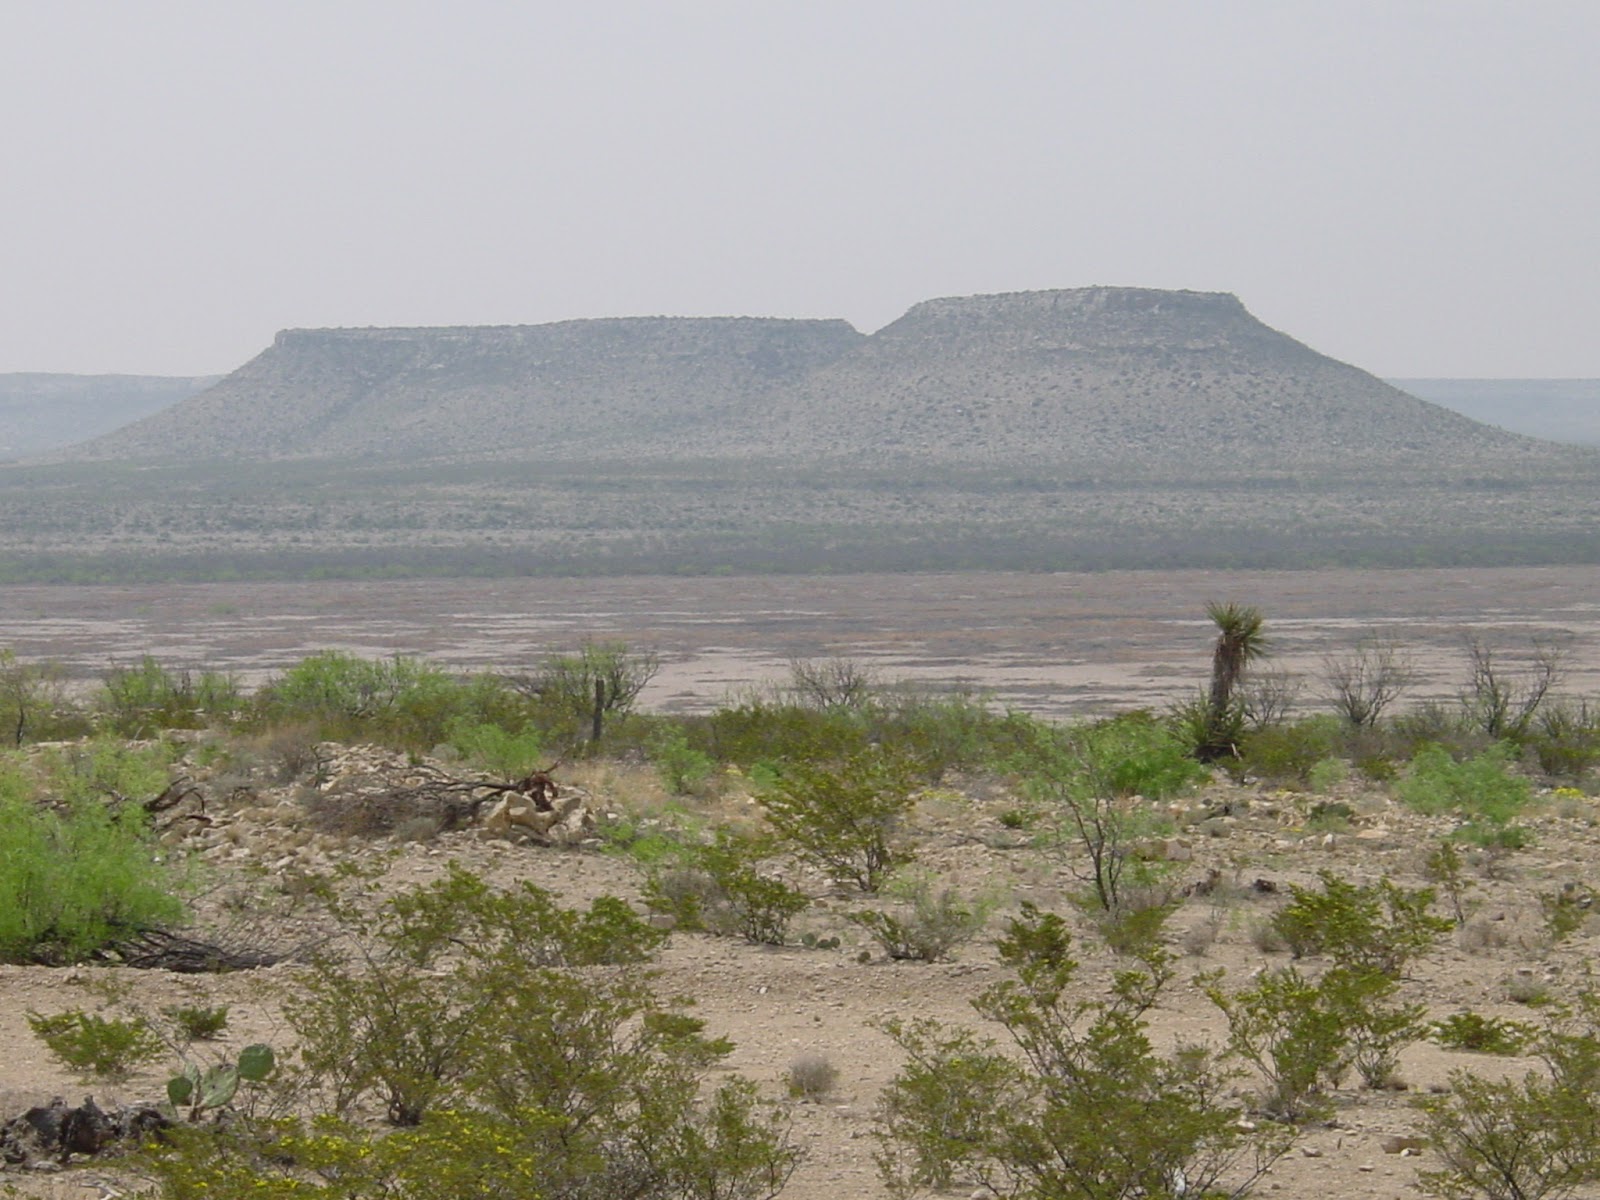 A desert mesa in the distance, dull green scrub brush in the foreground. 